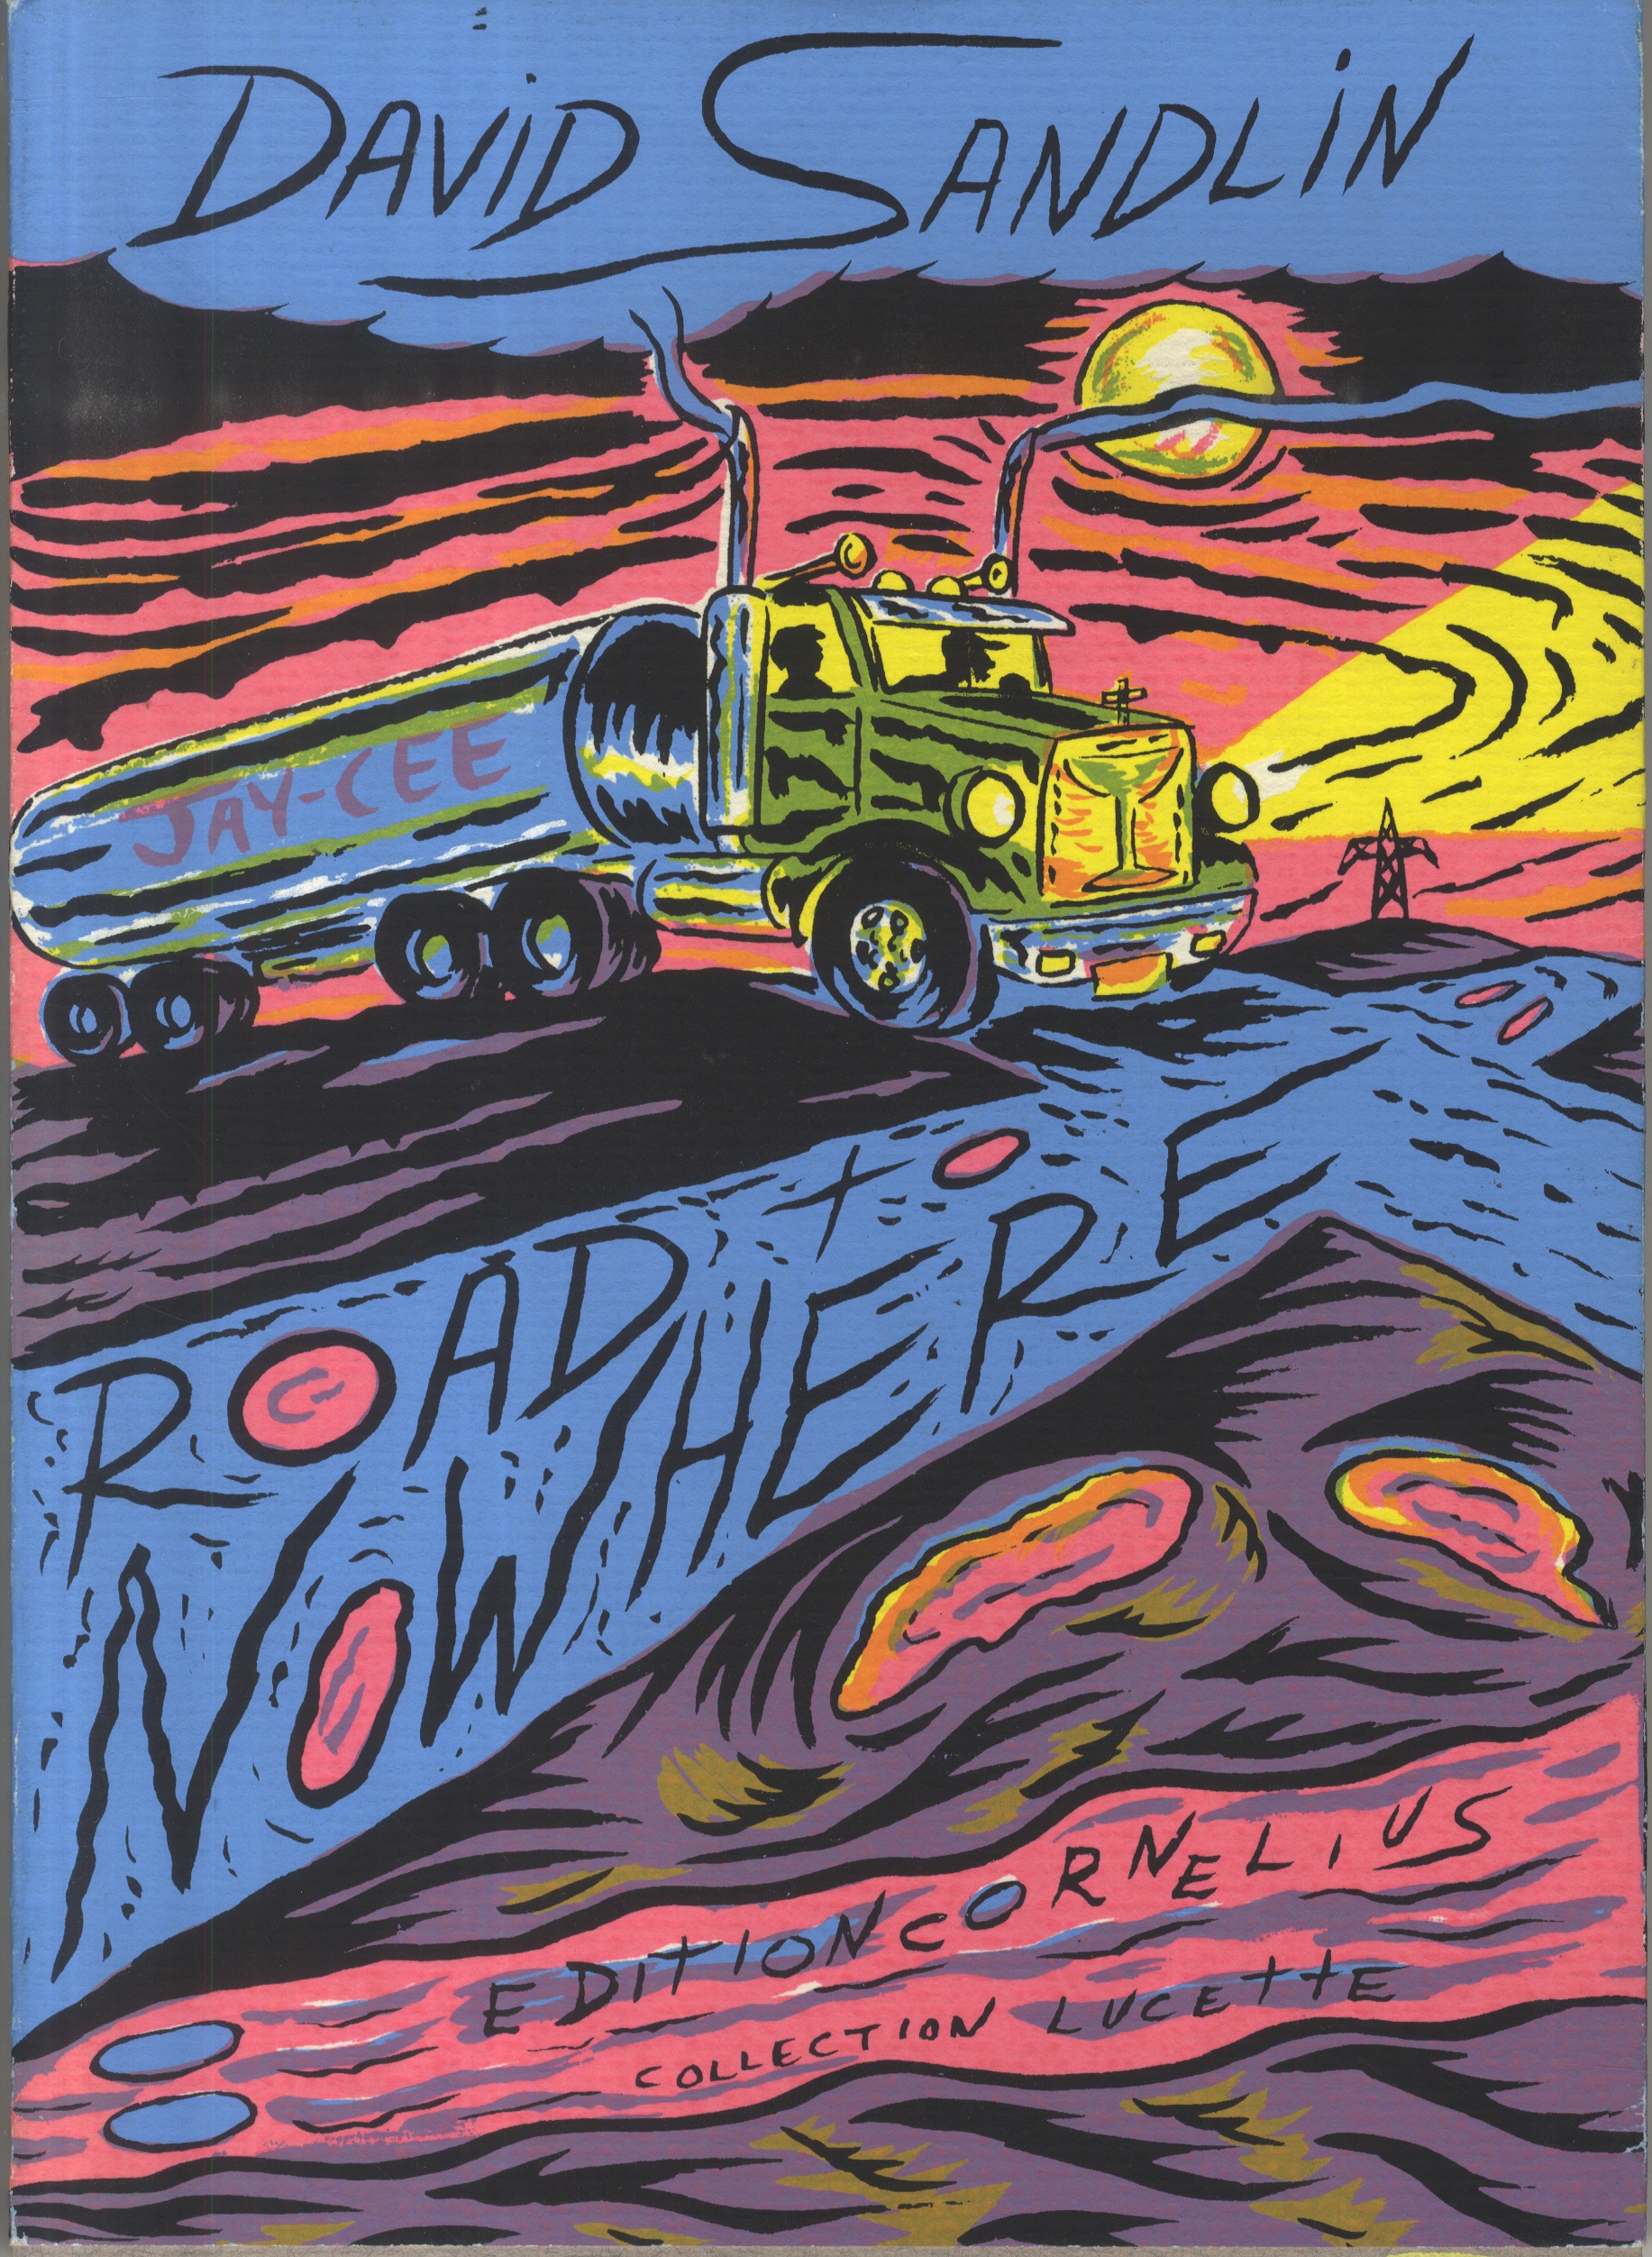 Multicolor illustration of a truck on the road in the night